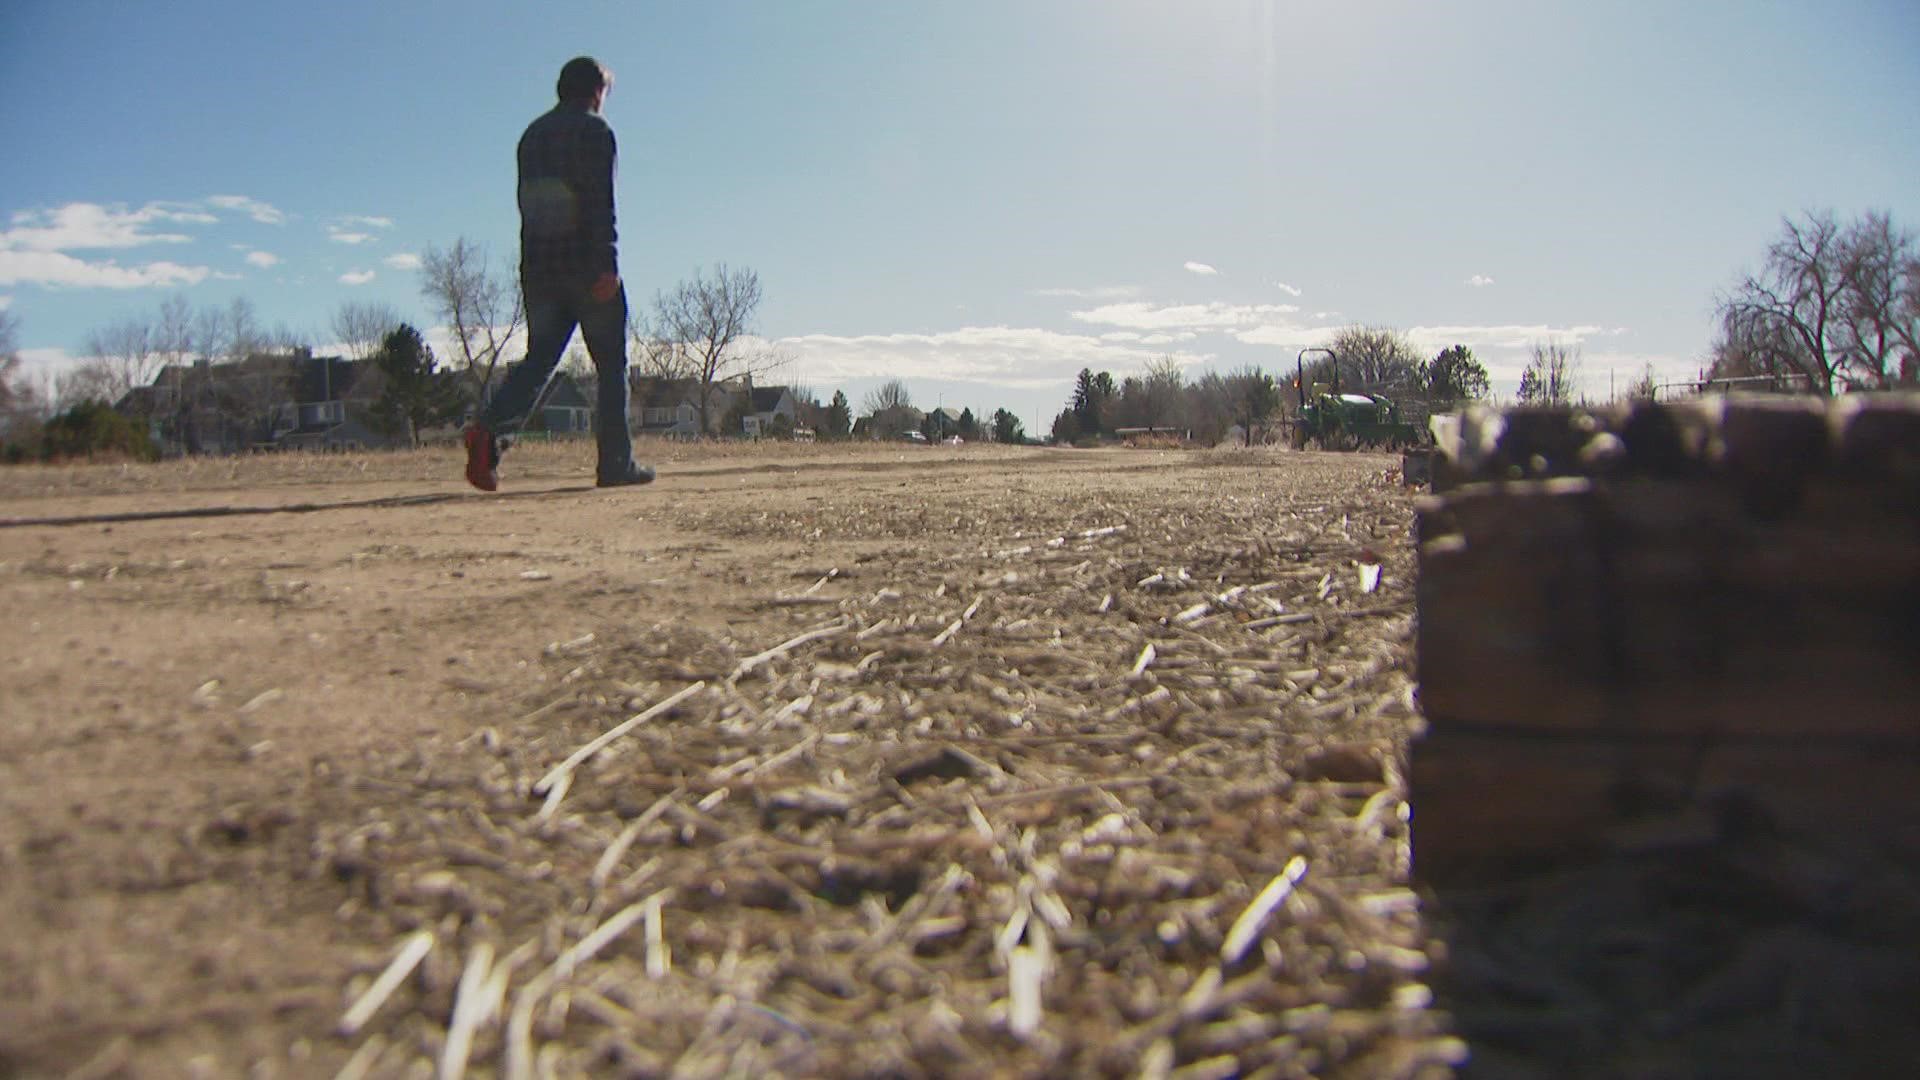 Reporter Courtney Yuen met with a Longmont regenerative farmer -- focused on creating healthy topsoil.